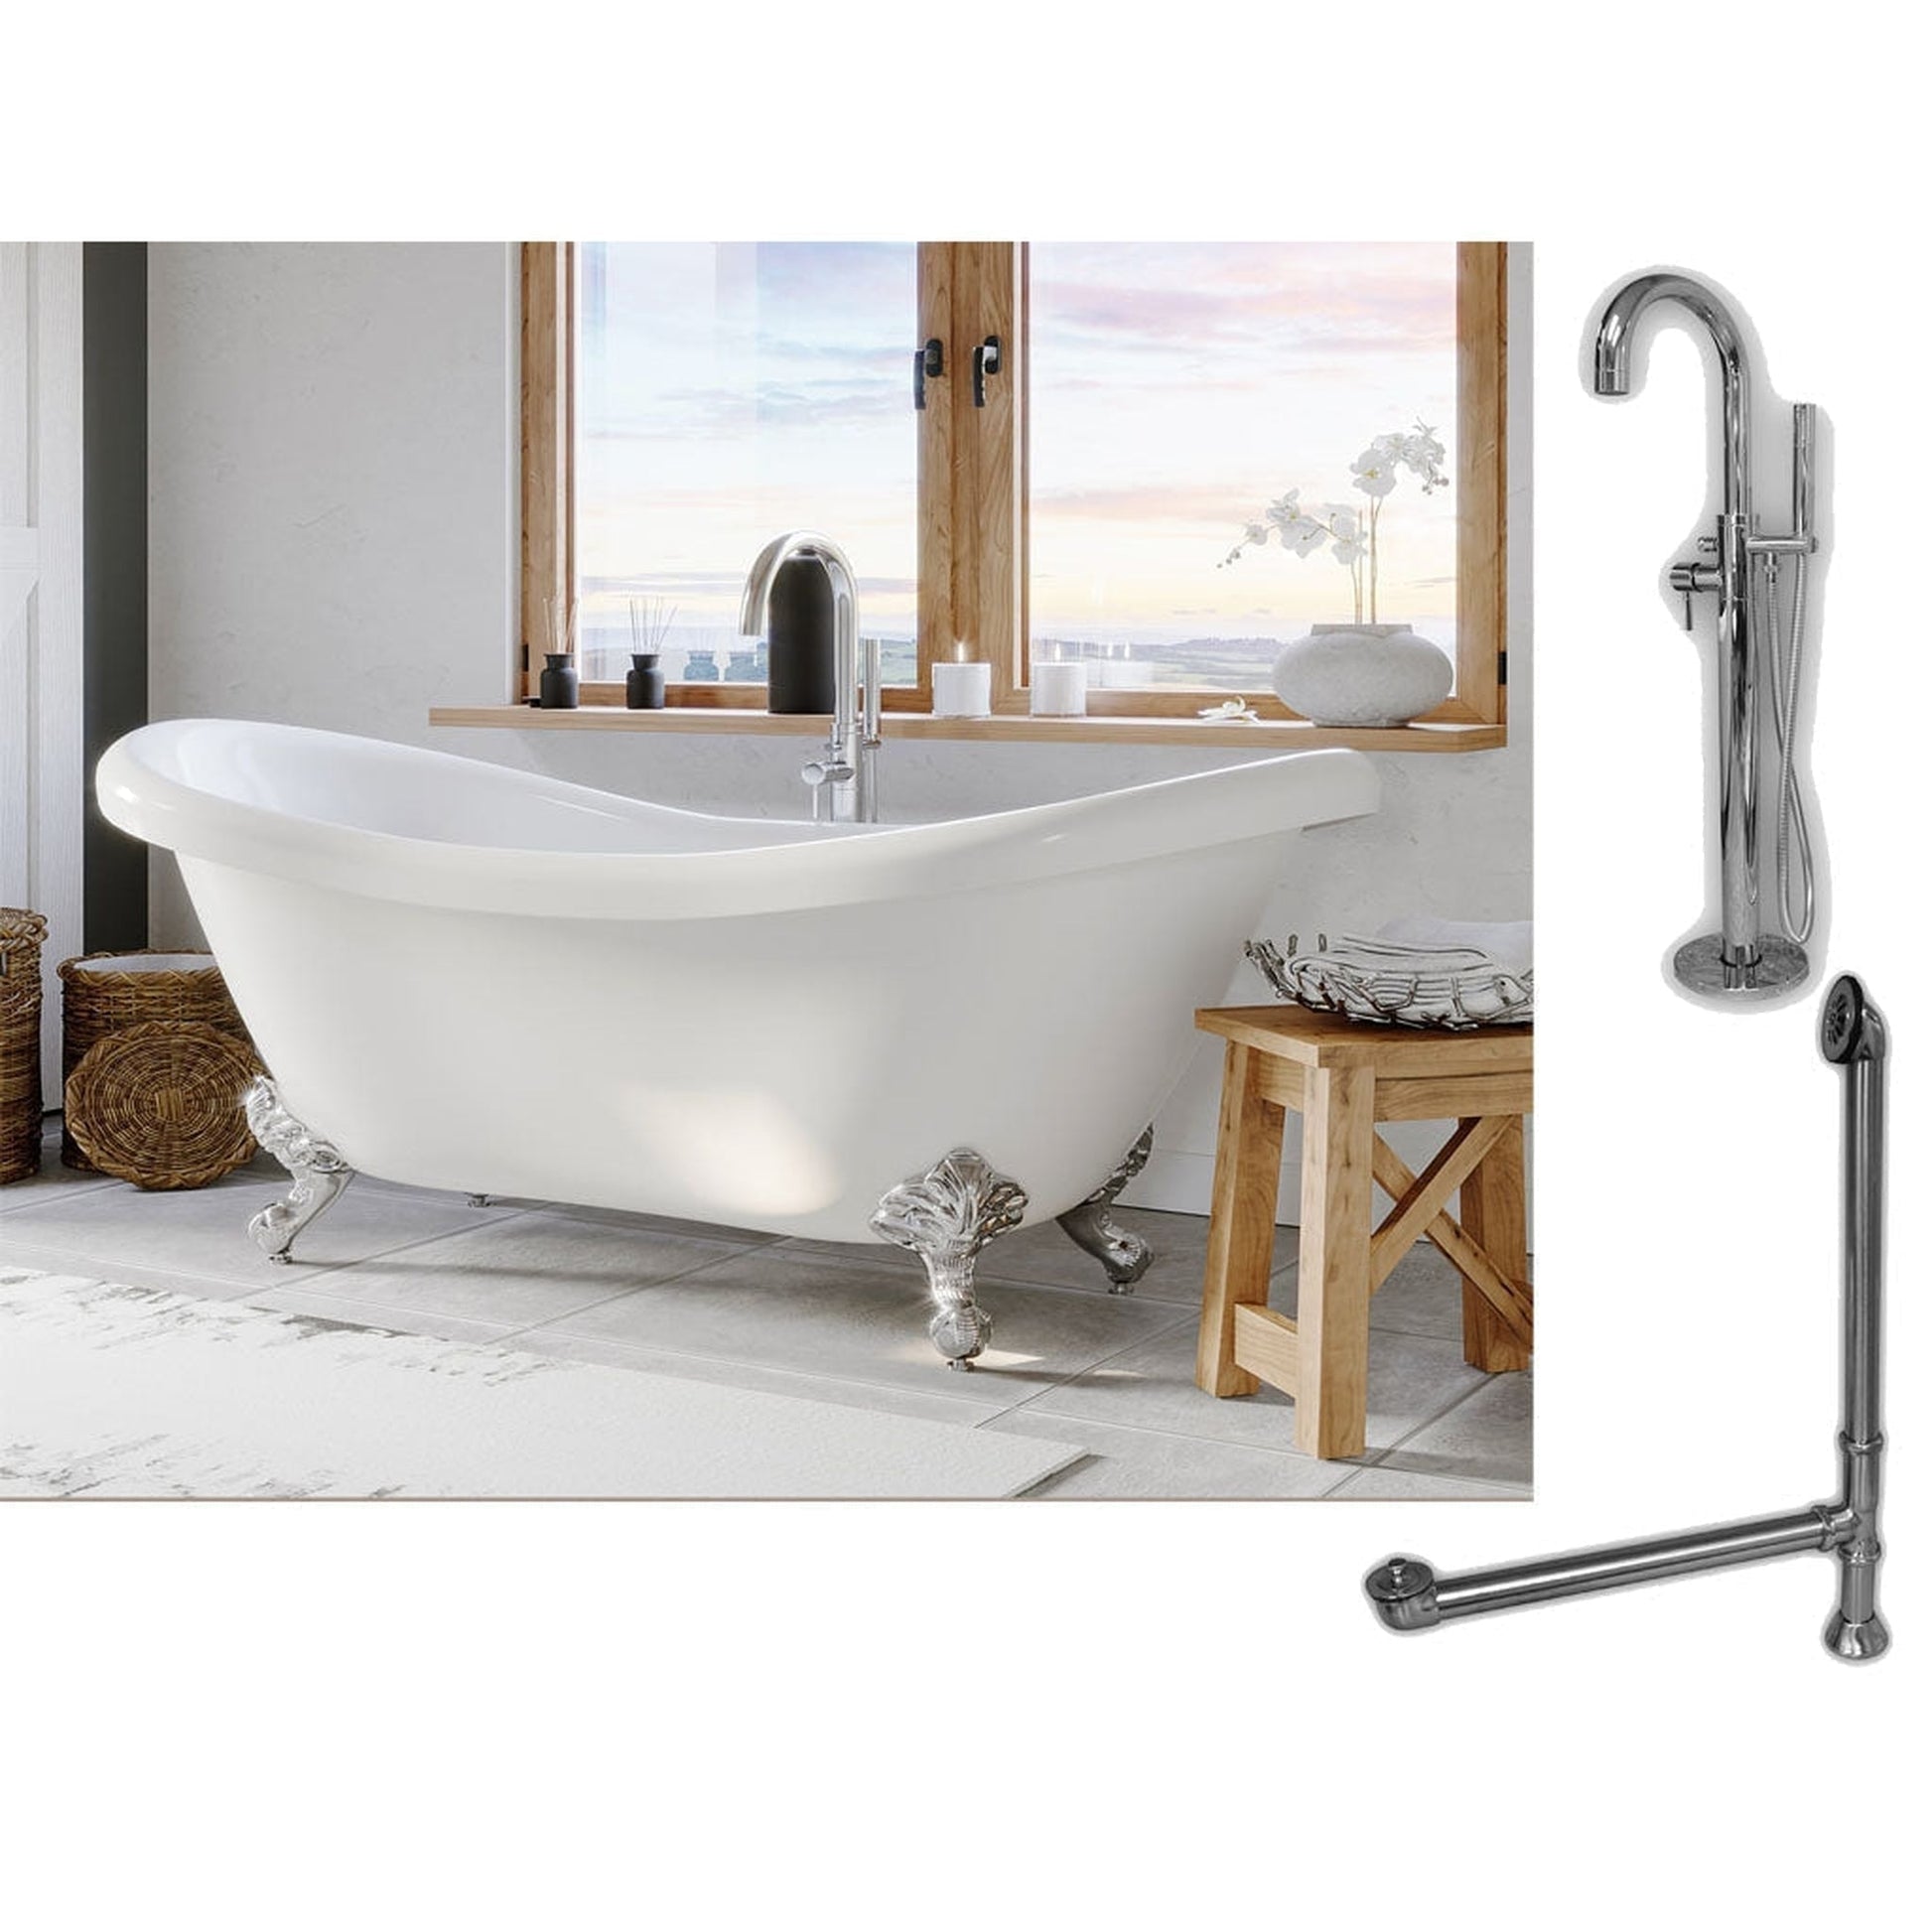 Cambridge Plumbing 69" White Double Slipper Clawfoot Acrylic Bathtub With No Deck Holes And Complete Plumbing Package Including Modern Floor Mounted Faucet, Drain And Overflow Assembly In Polished Chrome